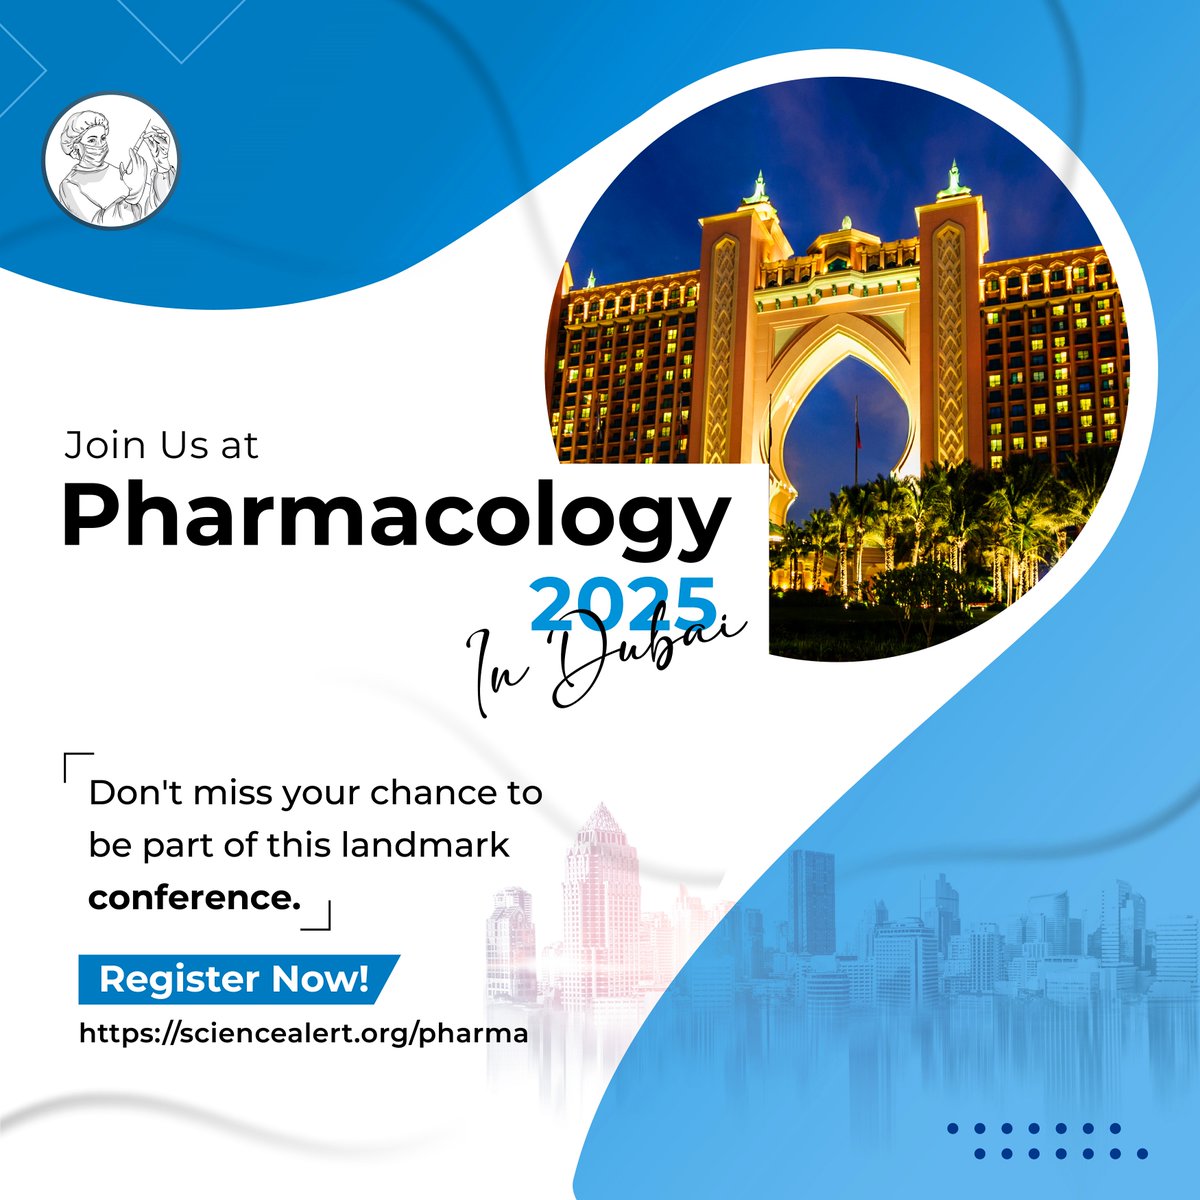 Join us for Pharmacology 2025, the ultimate gathering of minds in Dubai! Dive into the latest breakthroughs, network with experts, and explore the future of pharmacology. 🌿 Register now for an unforgettable experience! #Pharmacology2025 #DubaiConference sciencealert.org/pharma/